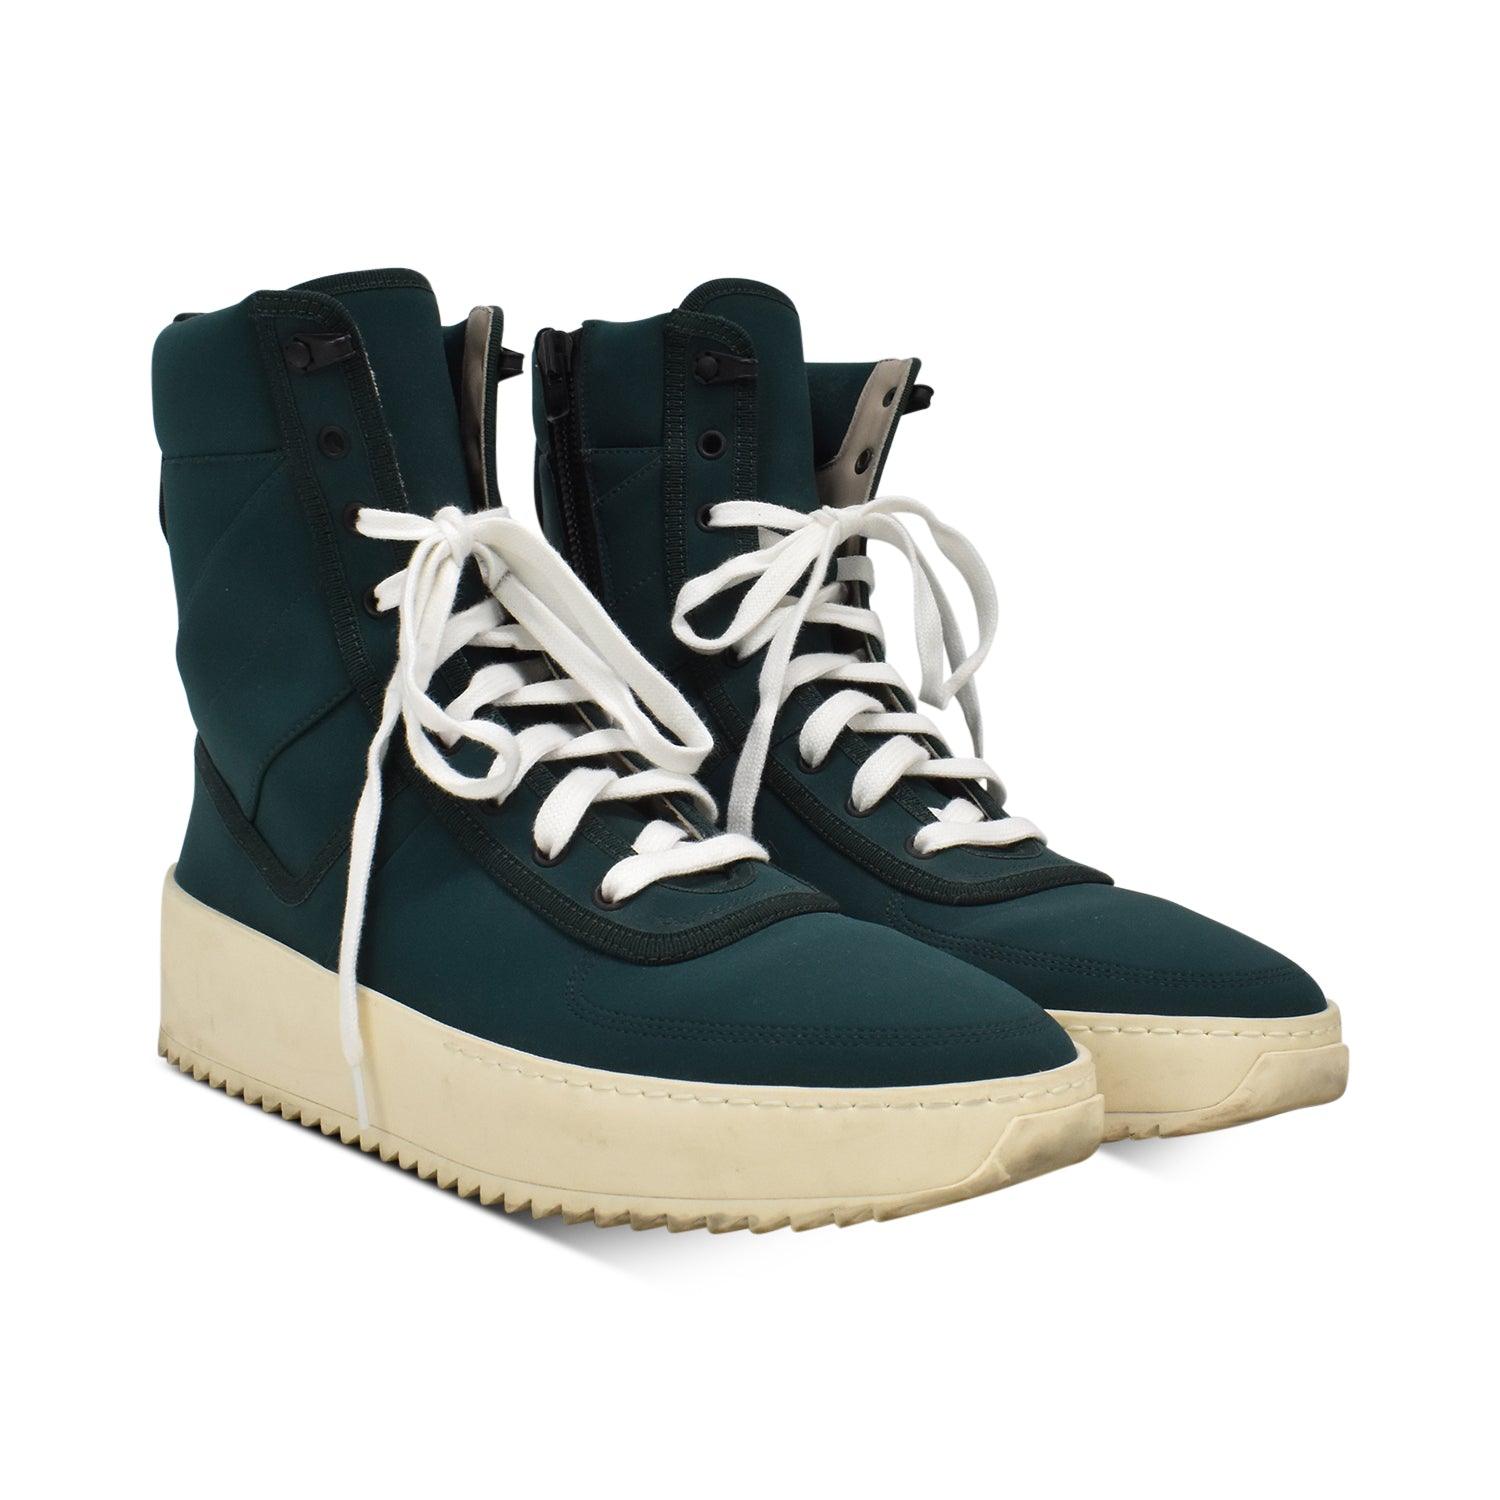 Fear of God Sneakers - Men's 44 - Fashionably Yours